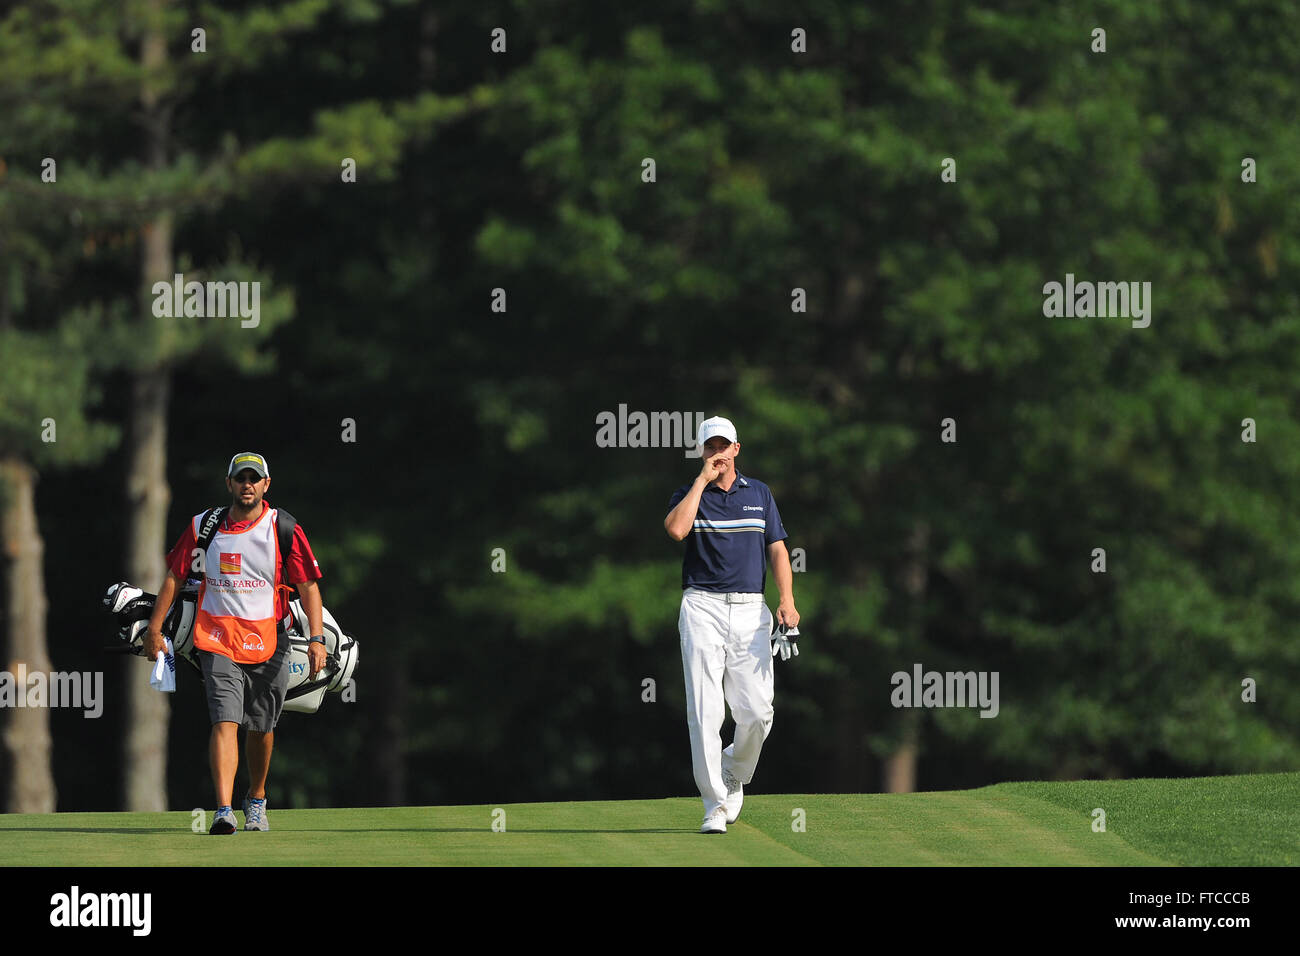 Charlotte, North Carolina, USA. 5th May, 2012. XXXXXX during the third round of the Wells Fargo Championship at the Quail Hollow Club on May 5, 2012 in Charlotte, N.C. ZUMA PRESS/ Scott A. Miller. © Scott A. Miller/ZUMA Wire/Alamy Live News Stock Photo